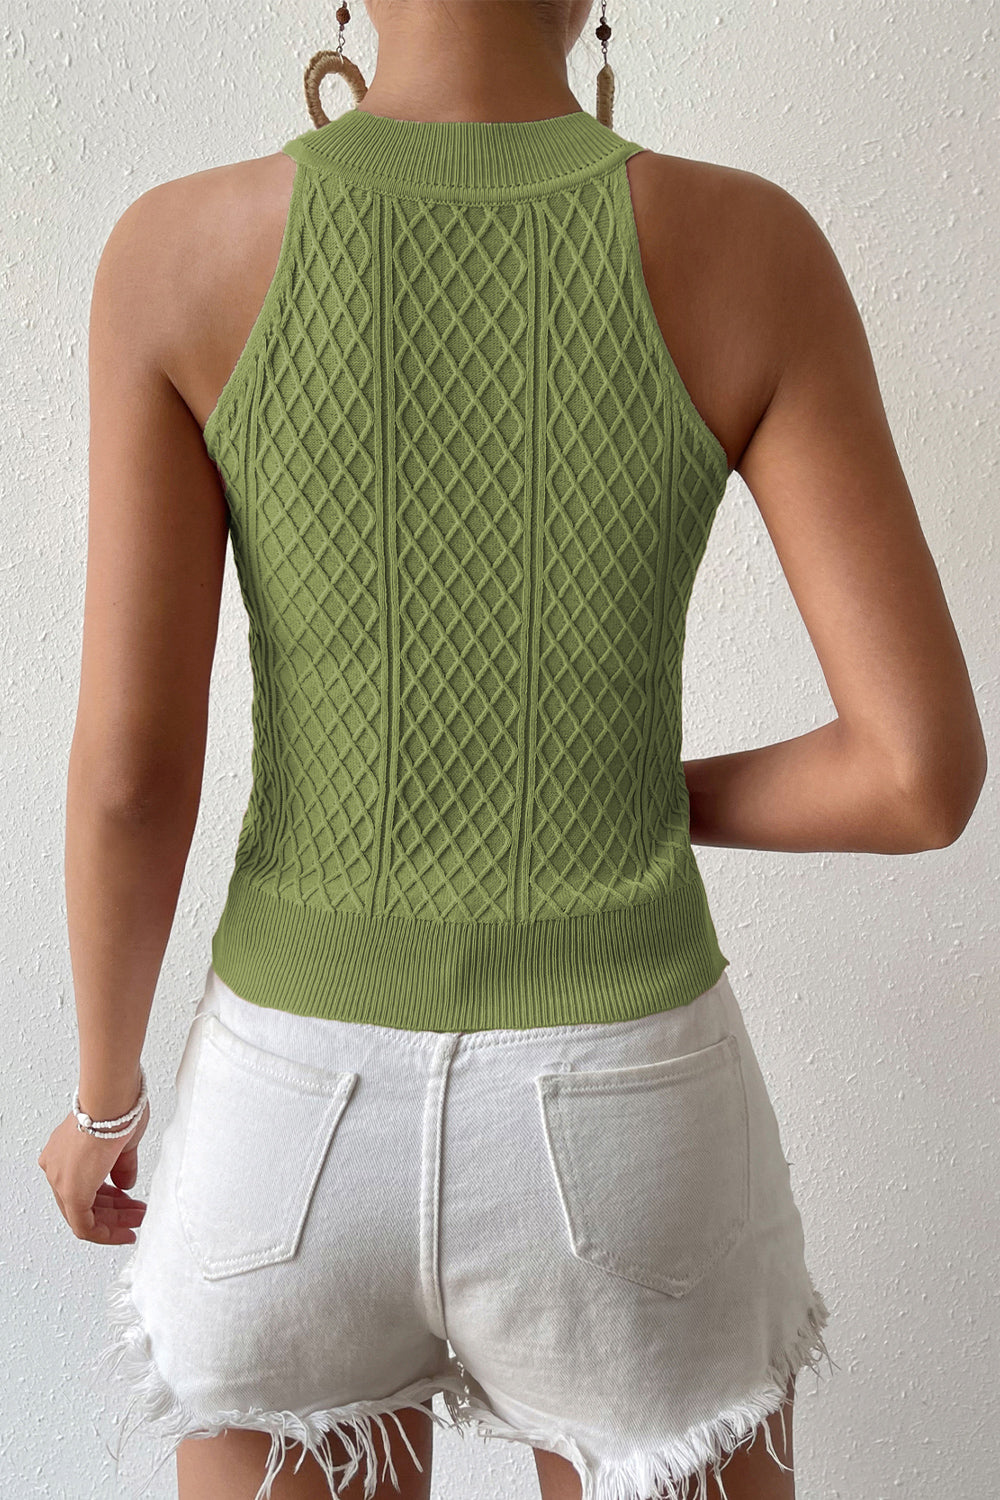 Round Neck Sleeveless Knit Top - Tops & Tees - Shirts & Tops - 15 - 2024